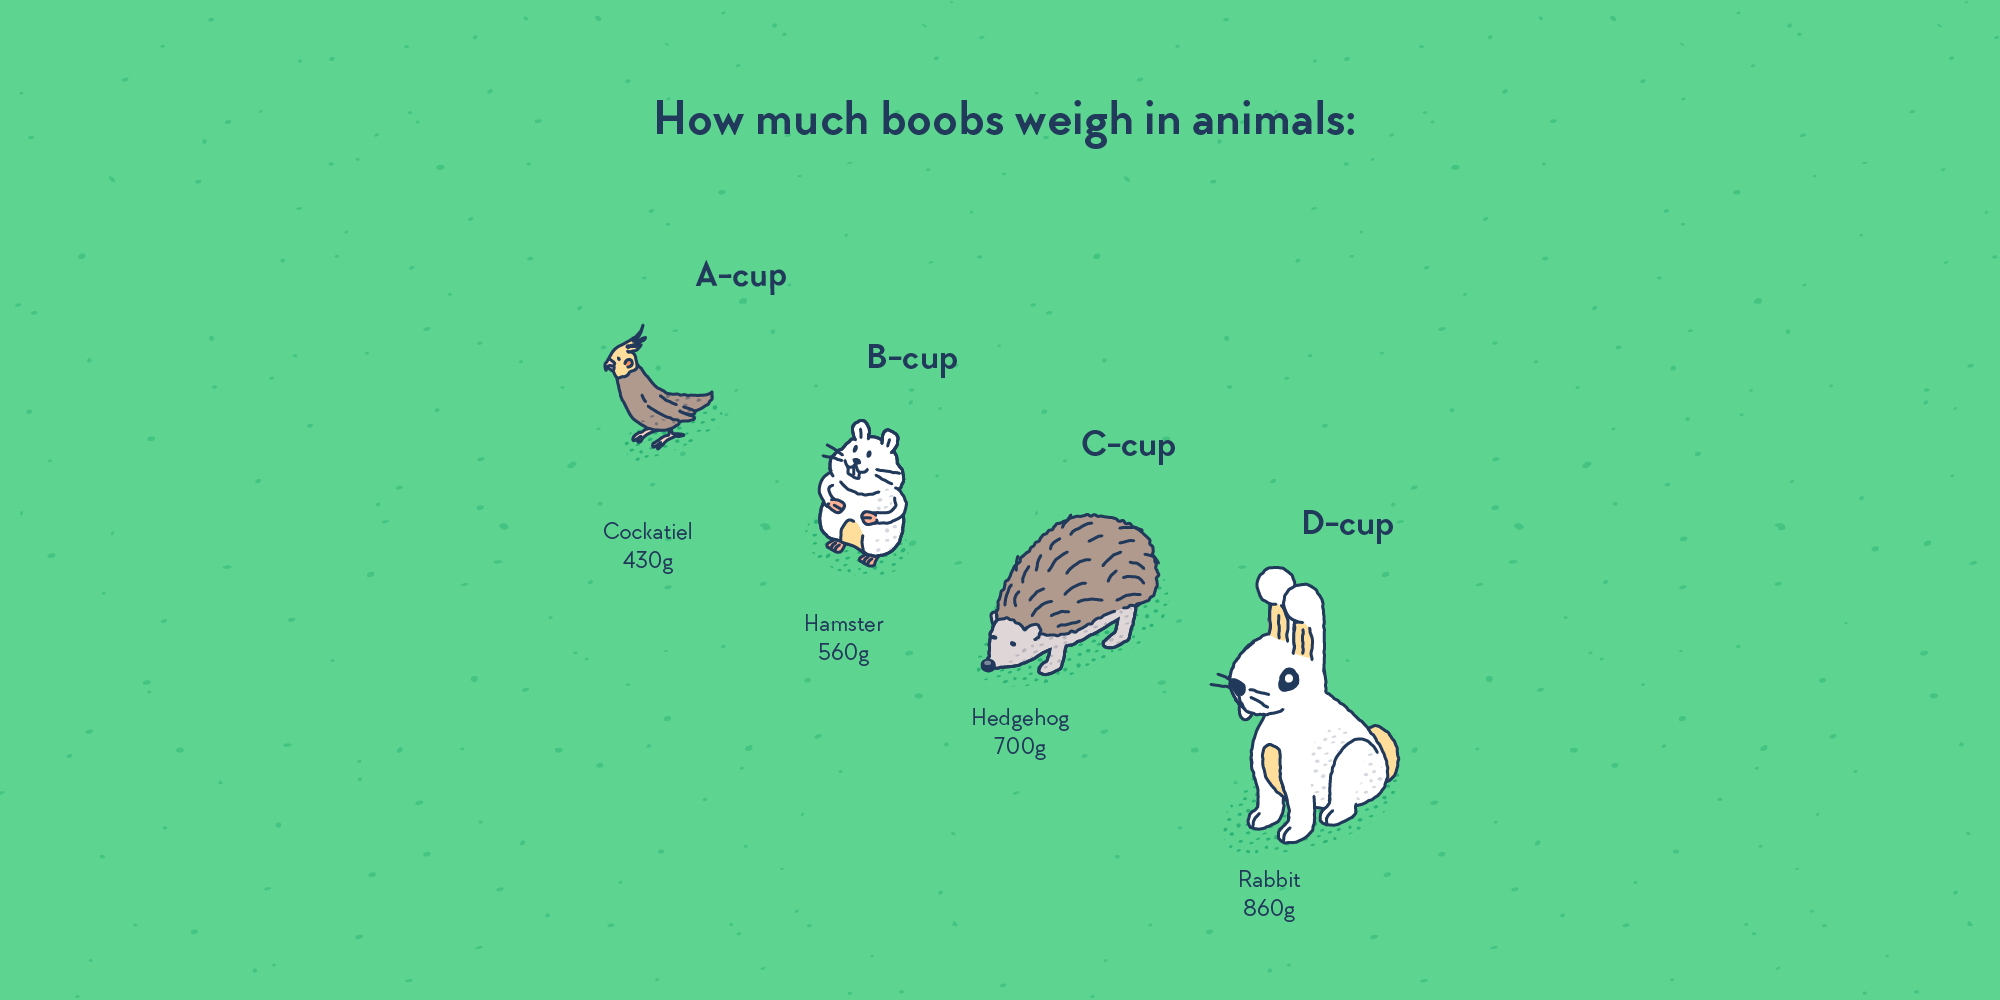 Four little animals, labelled with cup sizes: the cockatiel is A-cup, the hamster is B-cup, the hedgehog is C-cup, and the rabbit is D-cup.